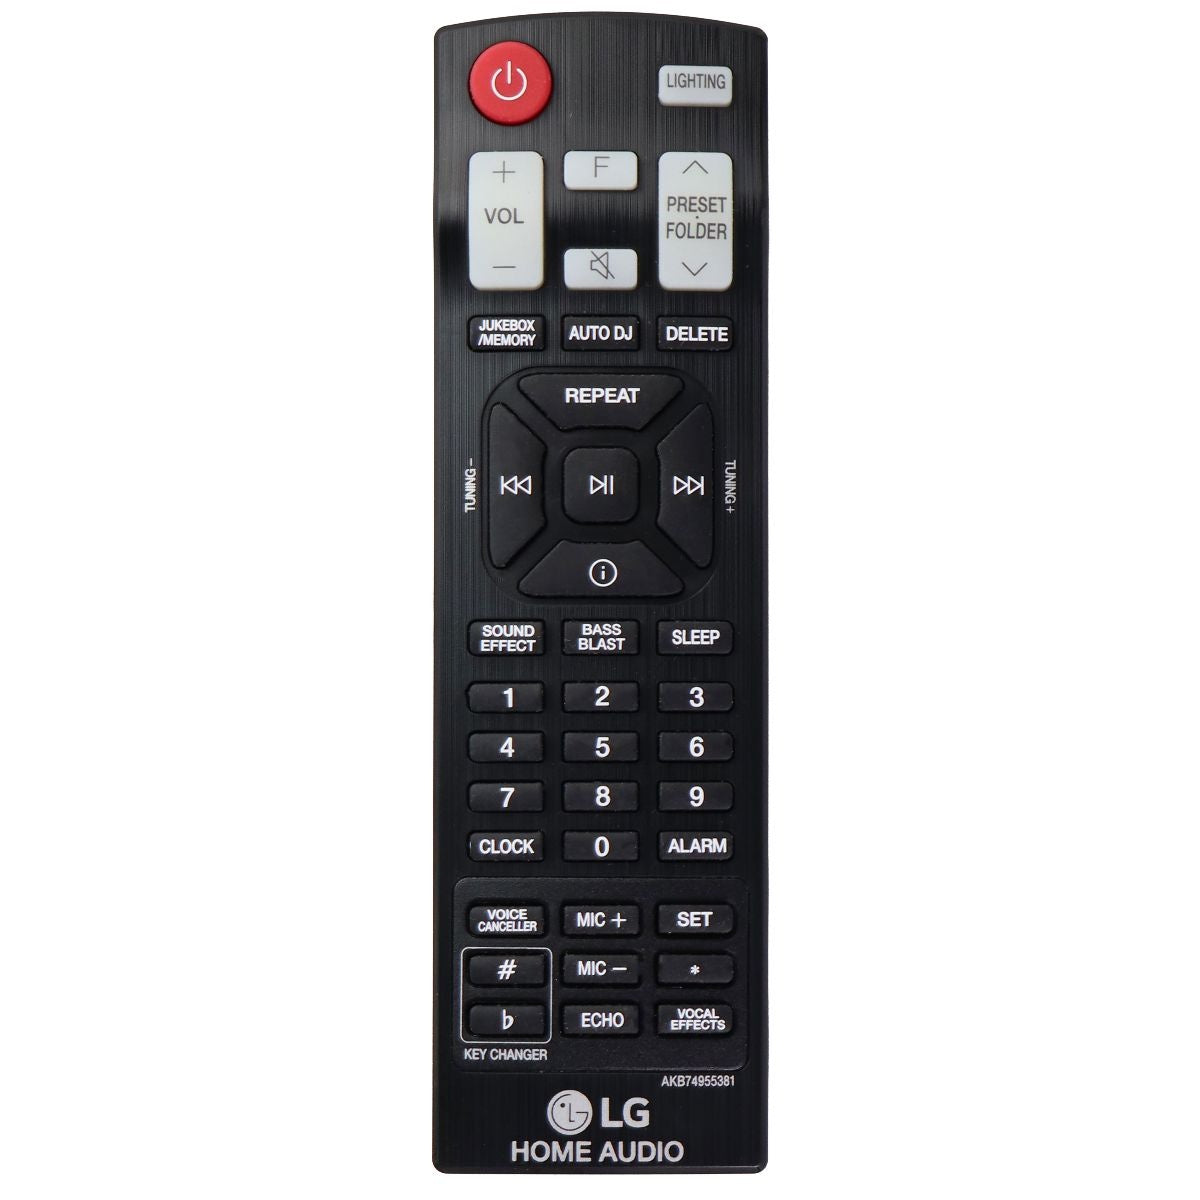 LG Remote Control (AKB74955381) for LG Home Audio - Black TV, Video & Audio Accessories - Remote Controls LG    - Simple Cell Bulk Wholesale Pricing - USA Seller